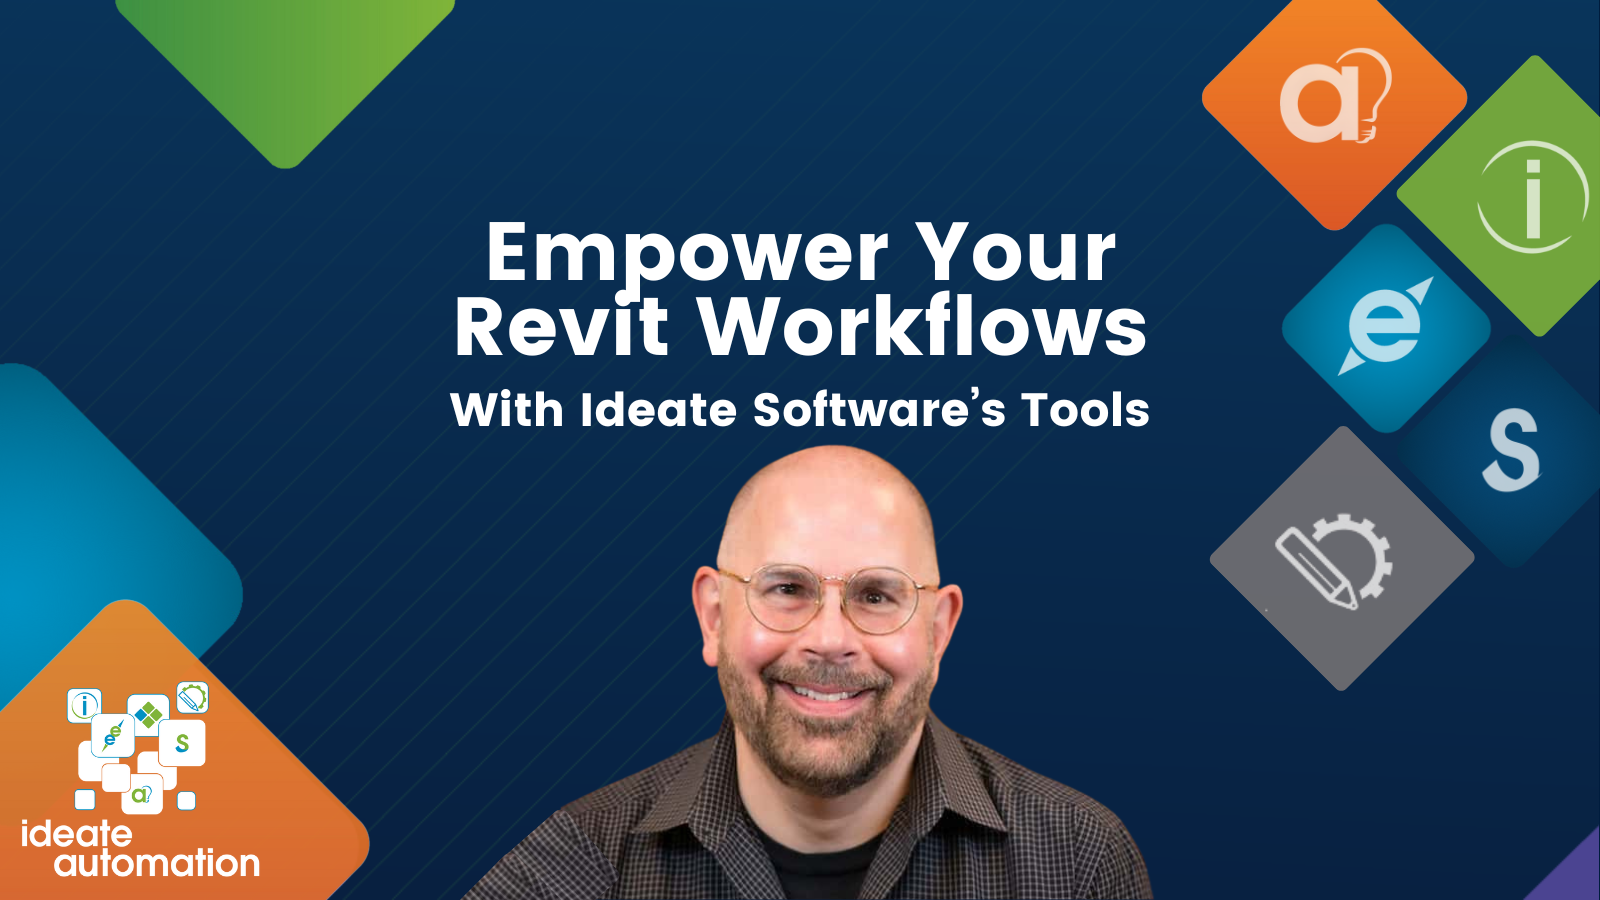 Empower Your Revit Workflows with Ideate Software's Revit Tools